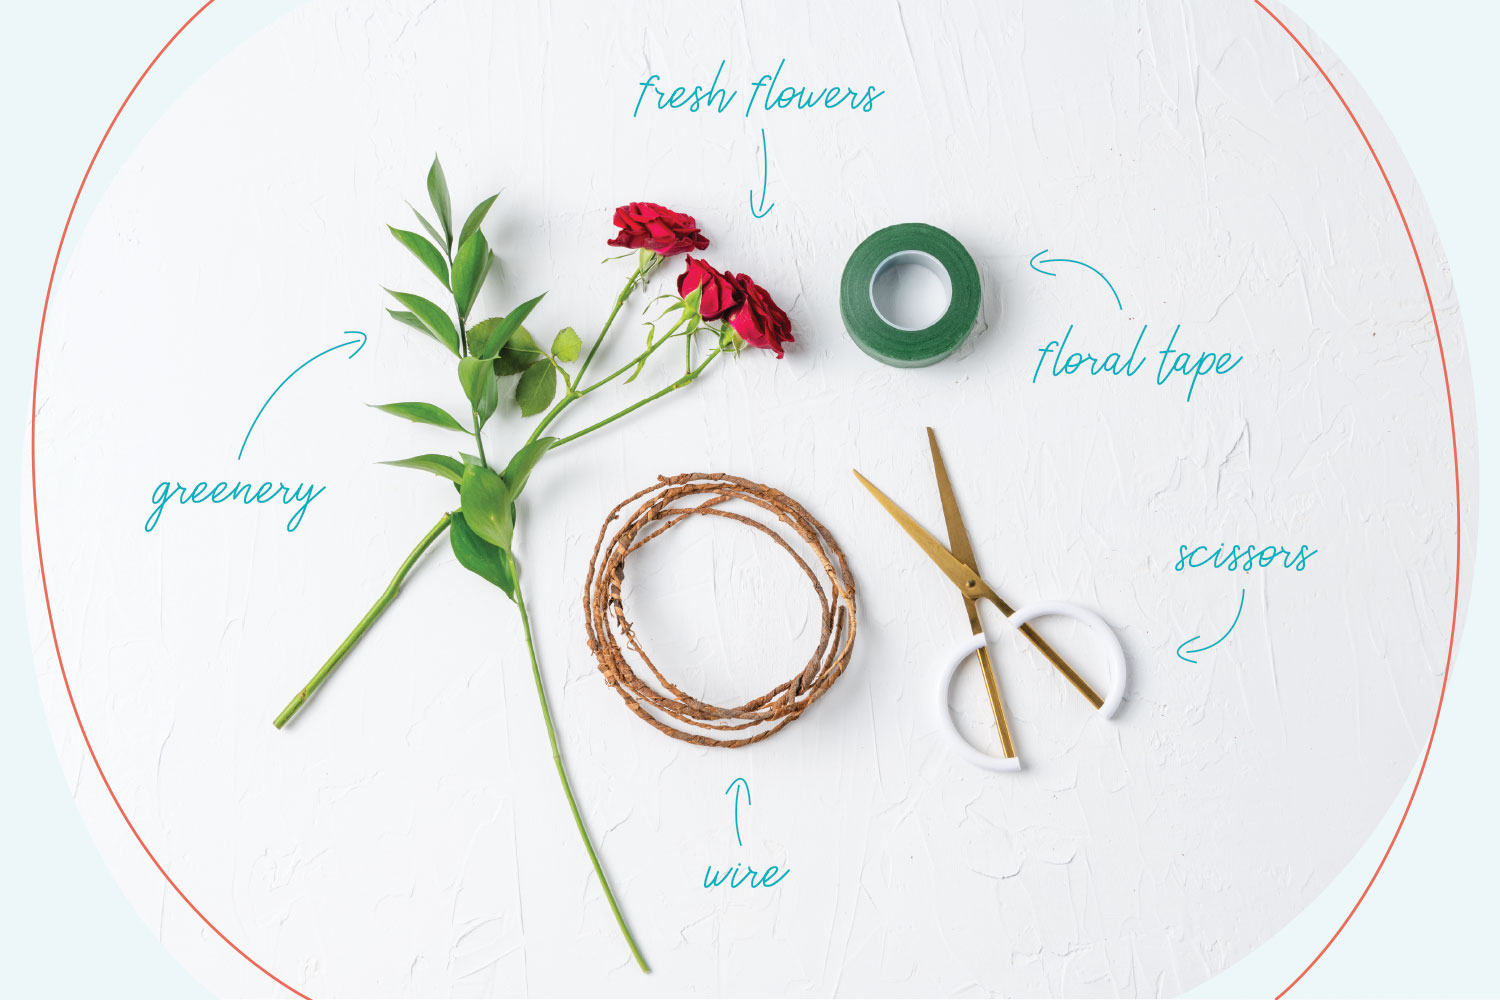 Basket of Blooms Flower Crown Kit with Instructional Tutorial — The Happy  Haku